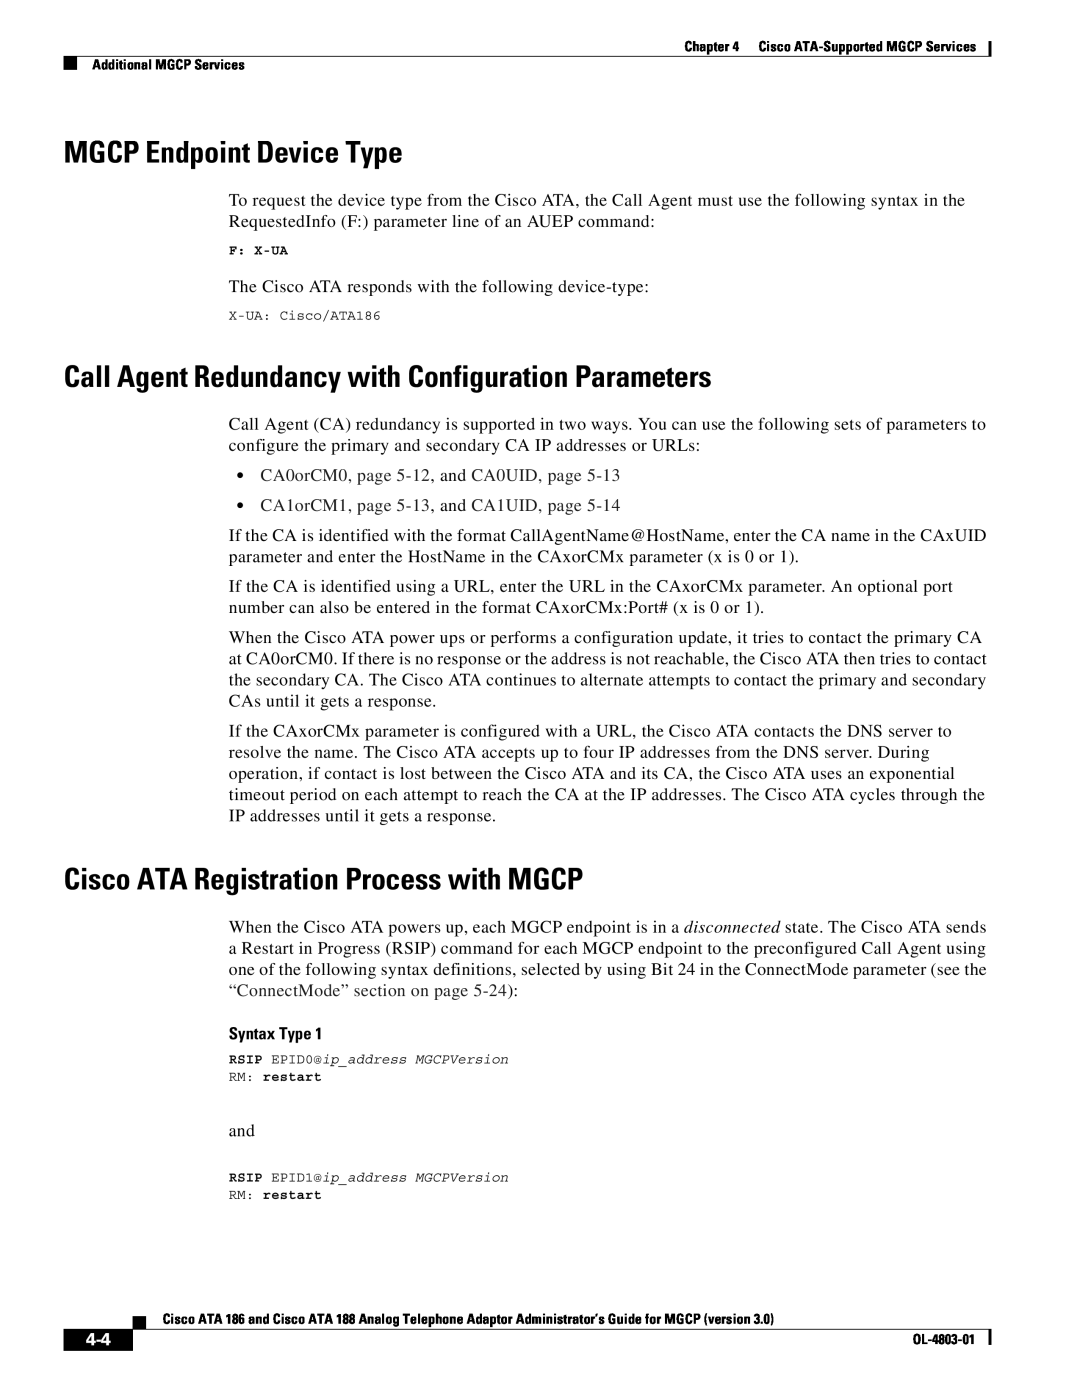 Cisco Systems ATA 186, ATA 188 MGCP Endpoint Device Type, Call Agent Redundancy with Configuration Parameters, Syntax Type 